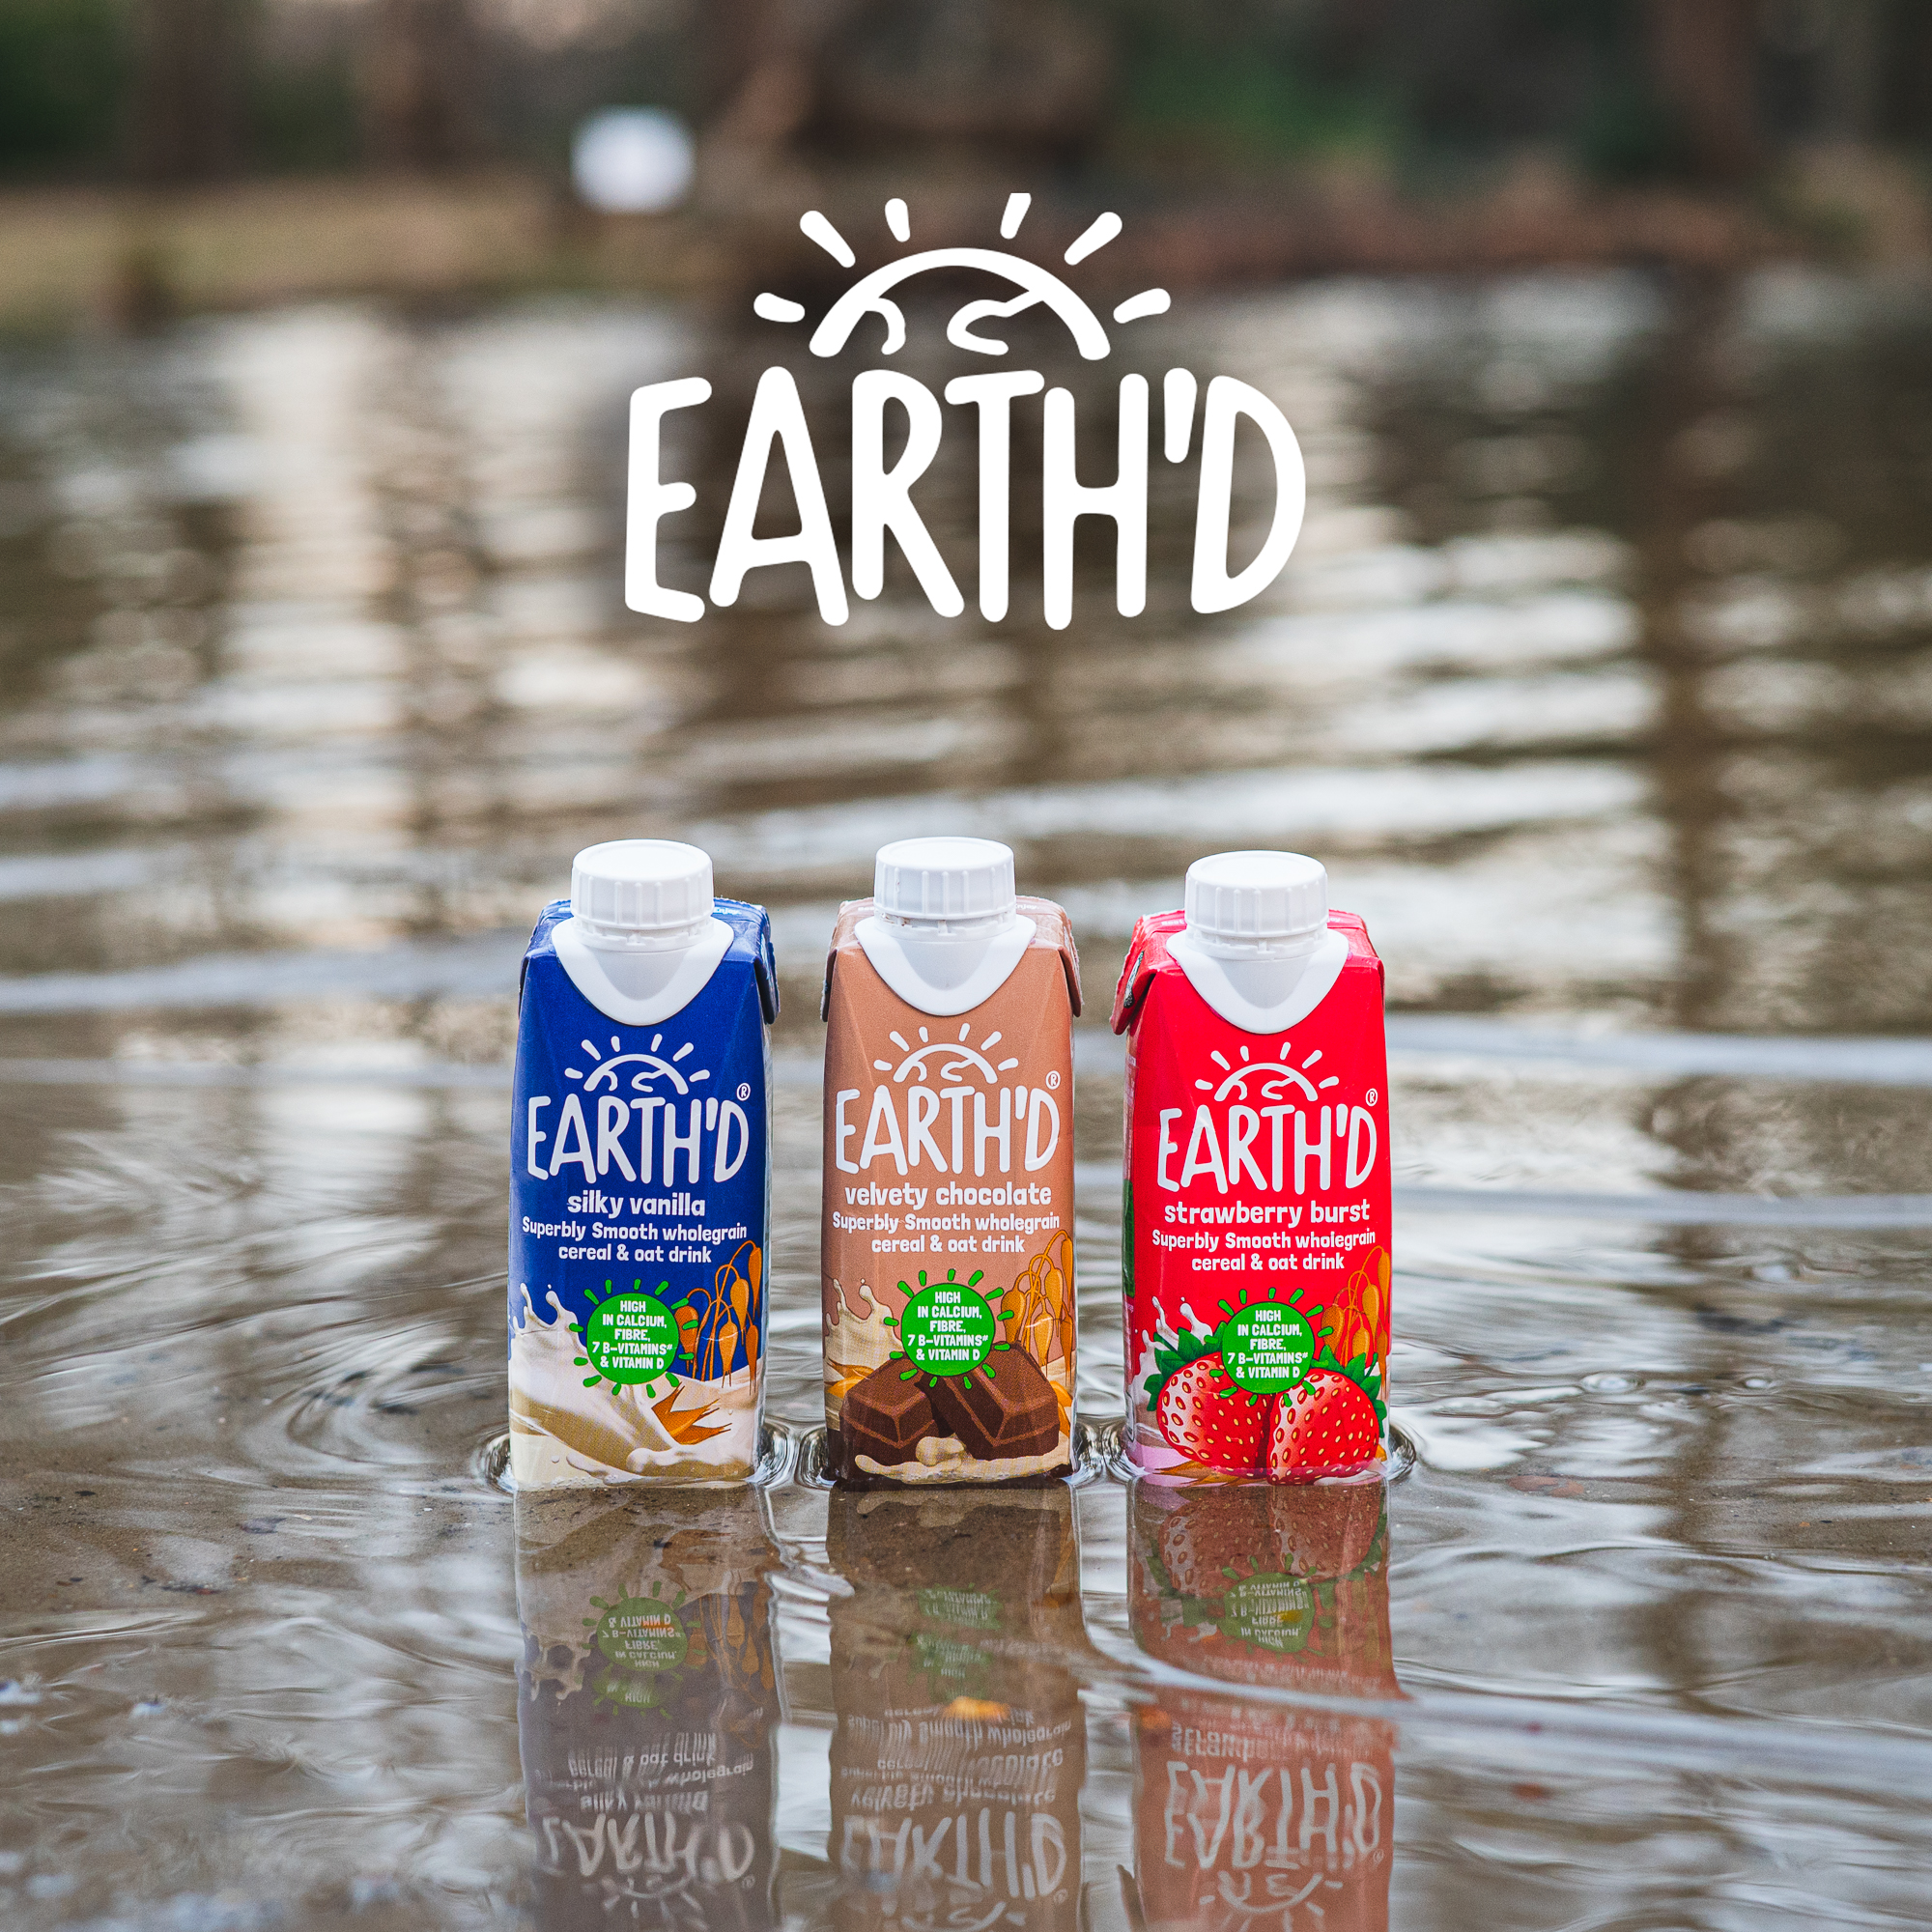 Earth’d wholegrain cereal and oat drink launches